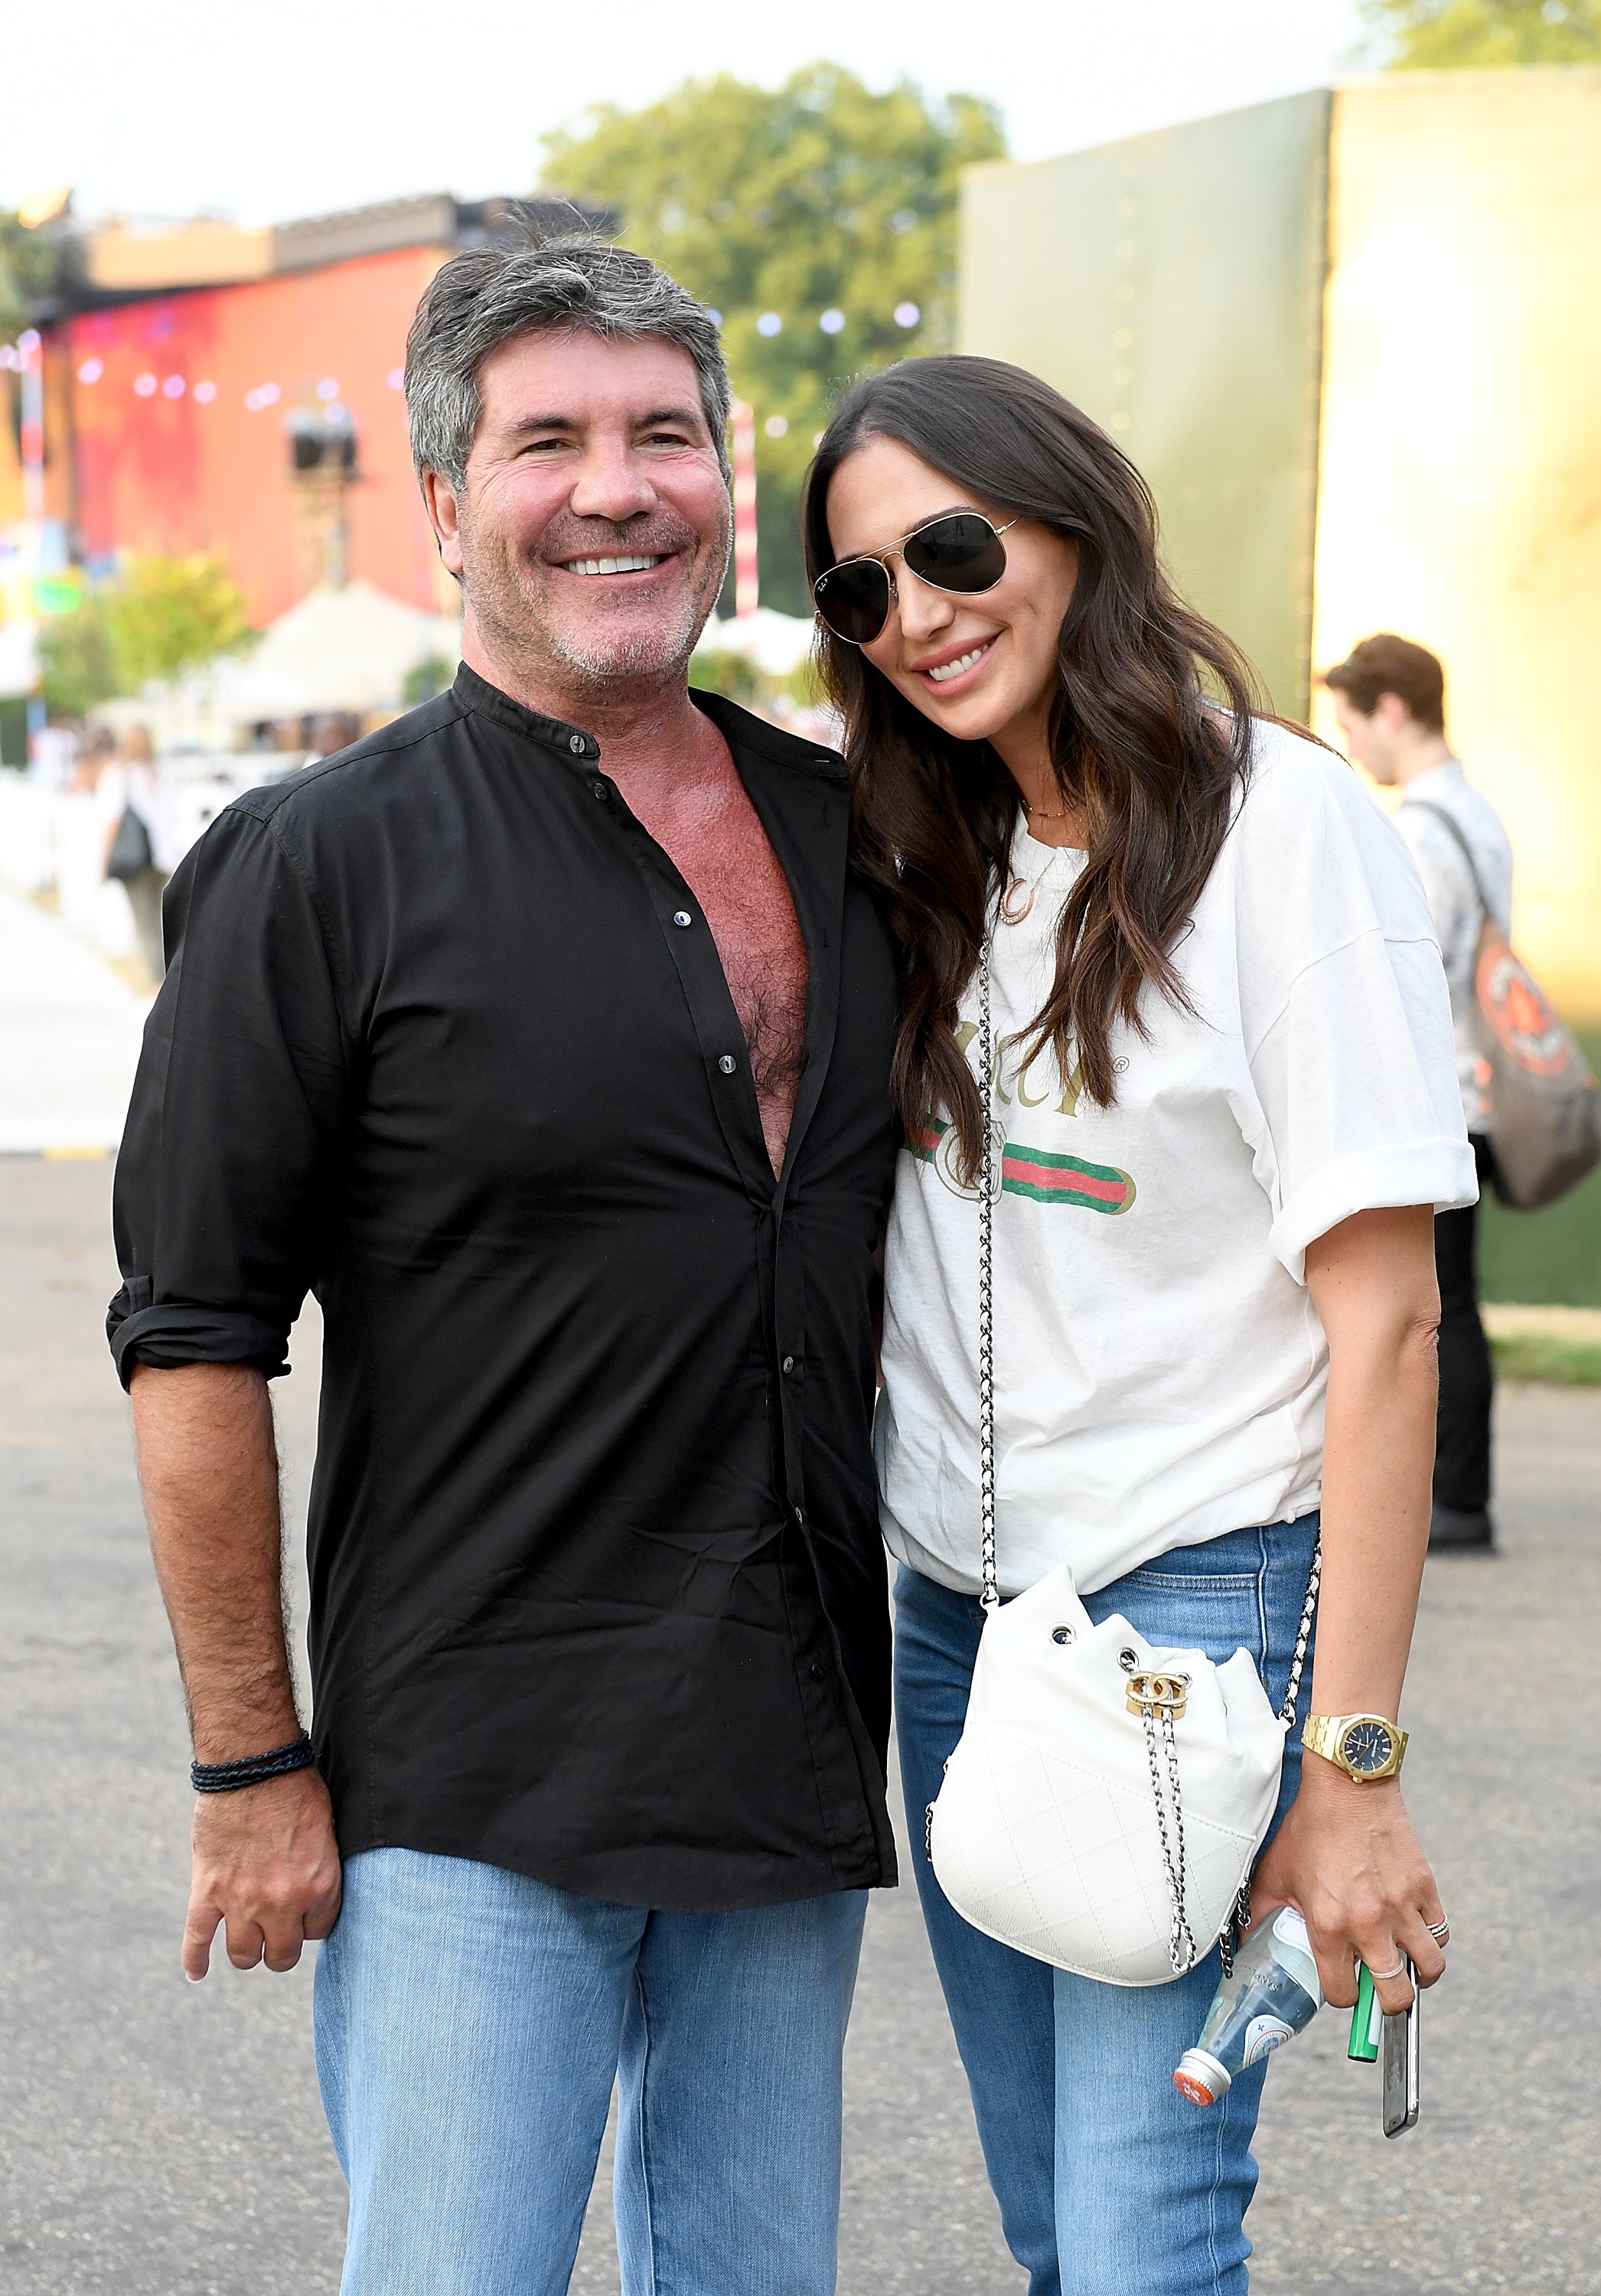 Simon Cowell and Lauren Silverman attend as Barclaycard present British Summer Time Hyde Park in Hyde Park on July 6, 2018, in London, England. | Source: Getty Images.